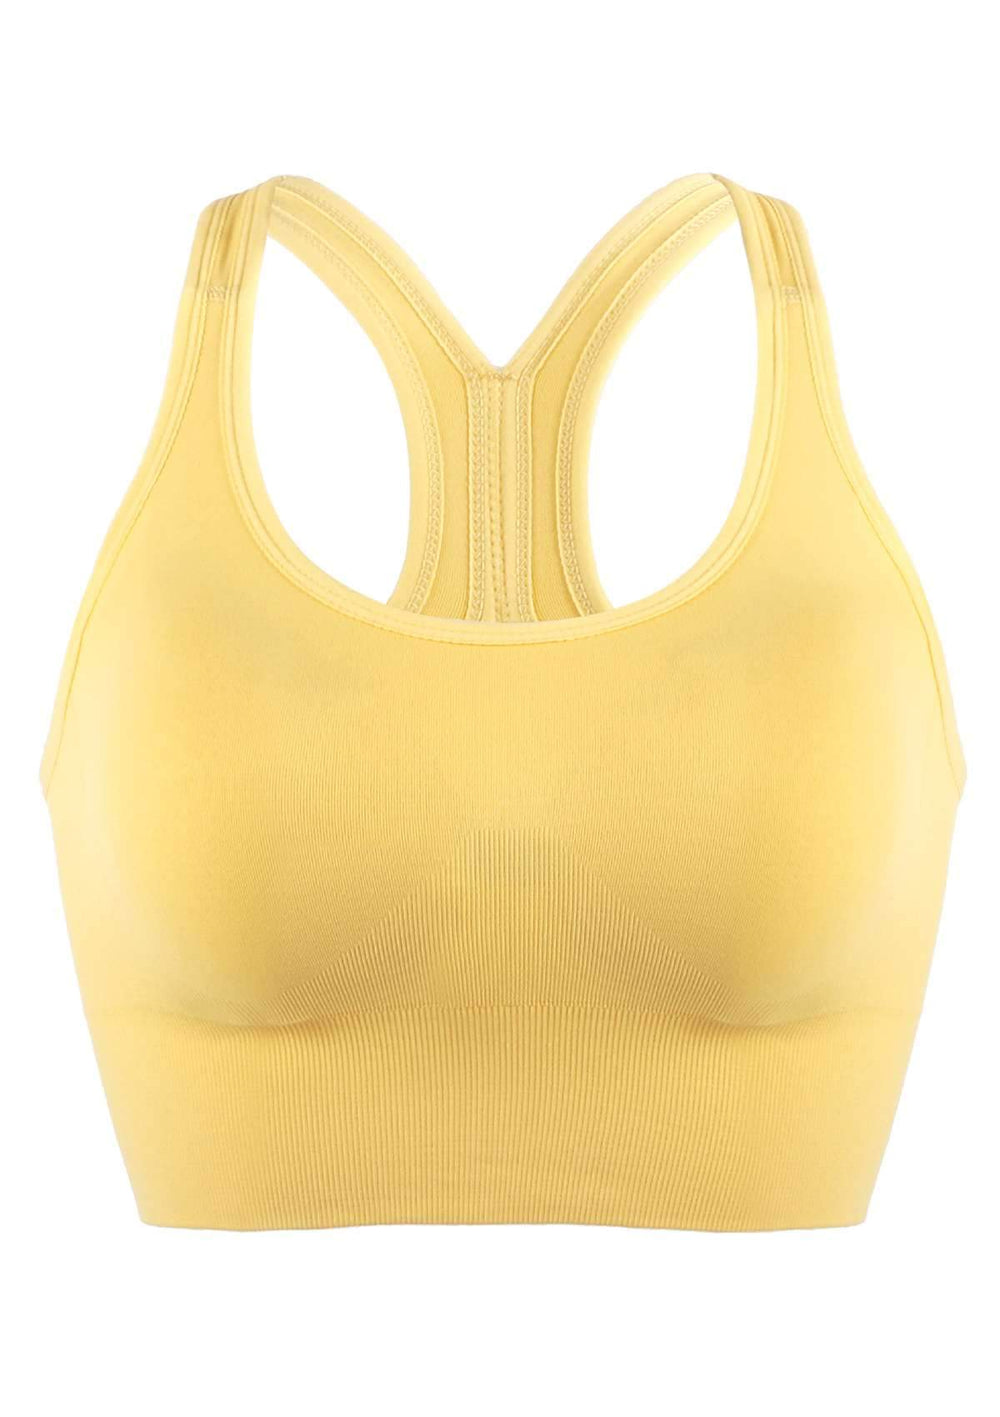 HSIA Racerback Sports Bra with Adjustable Back Clasp for a Clean Fit